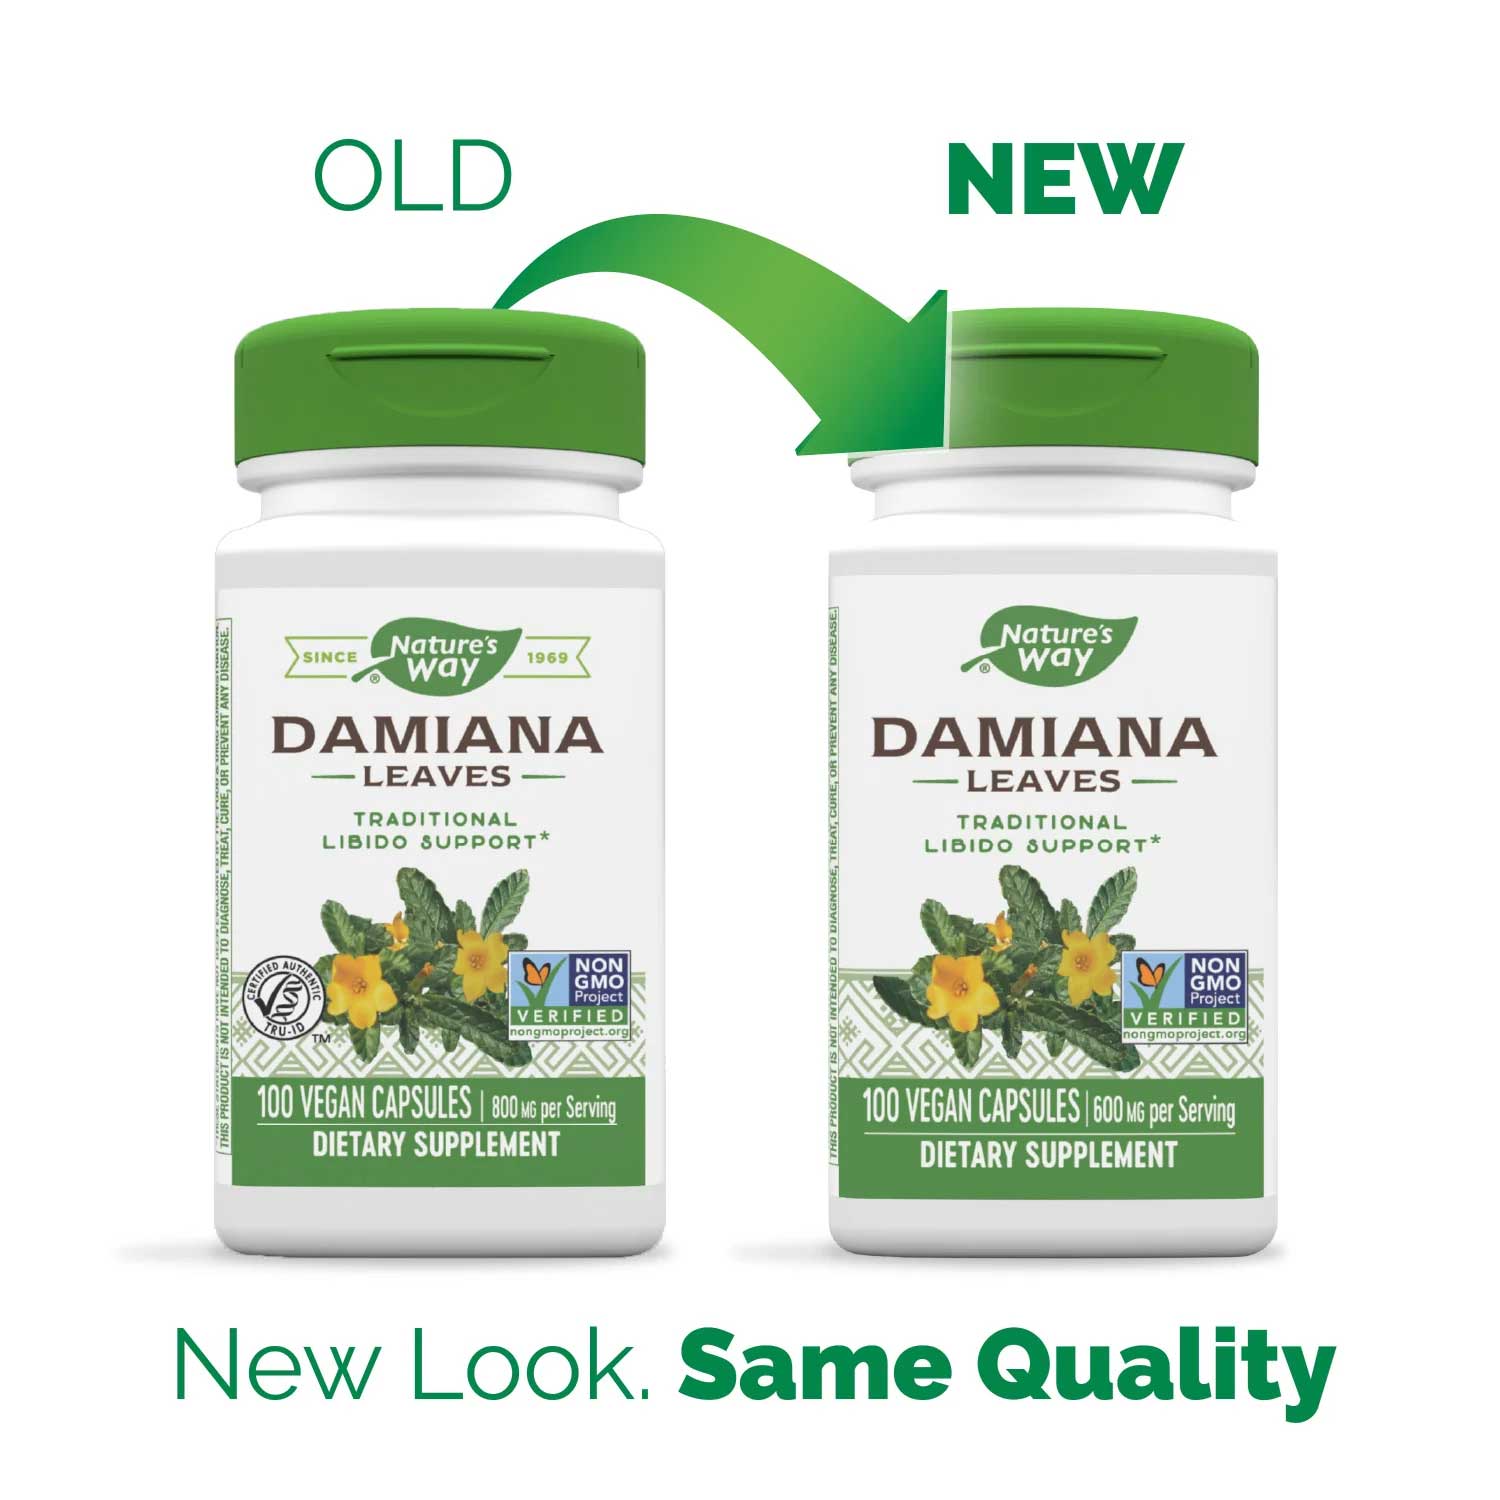 Nature's Way Damiana Leaves New Look